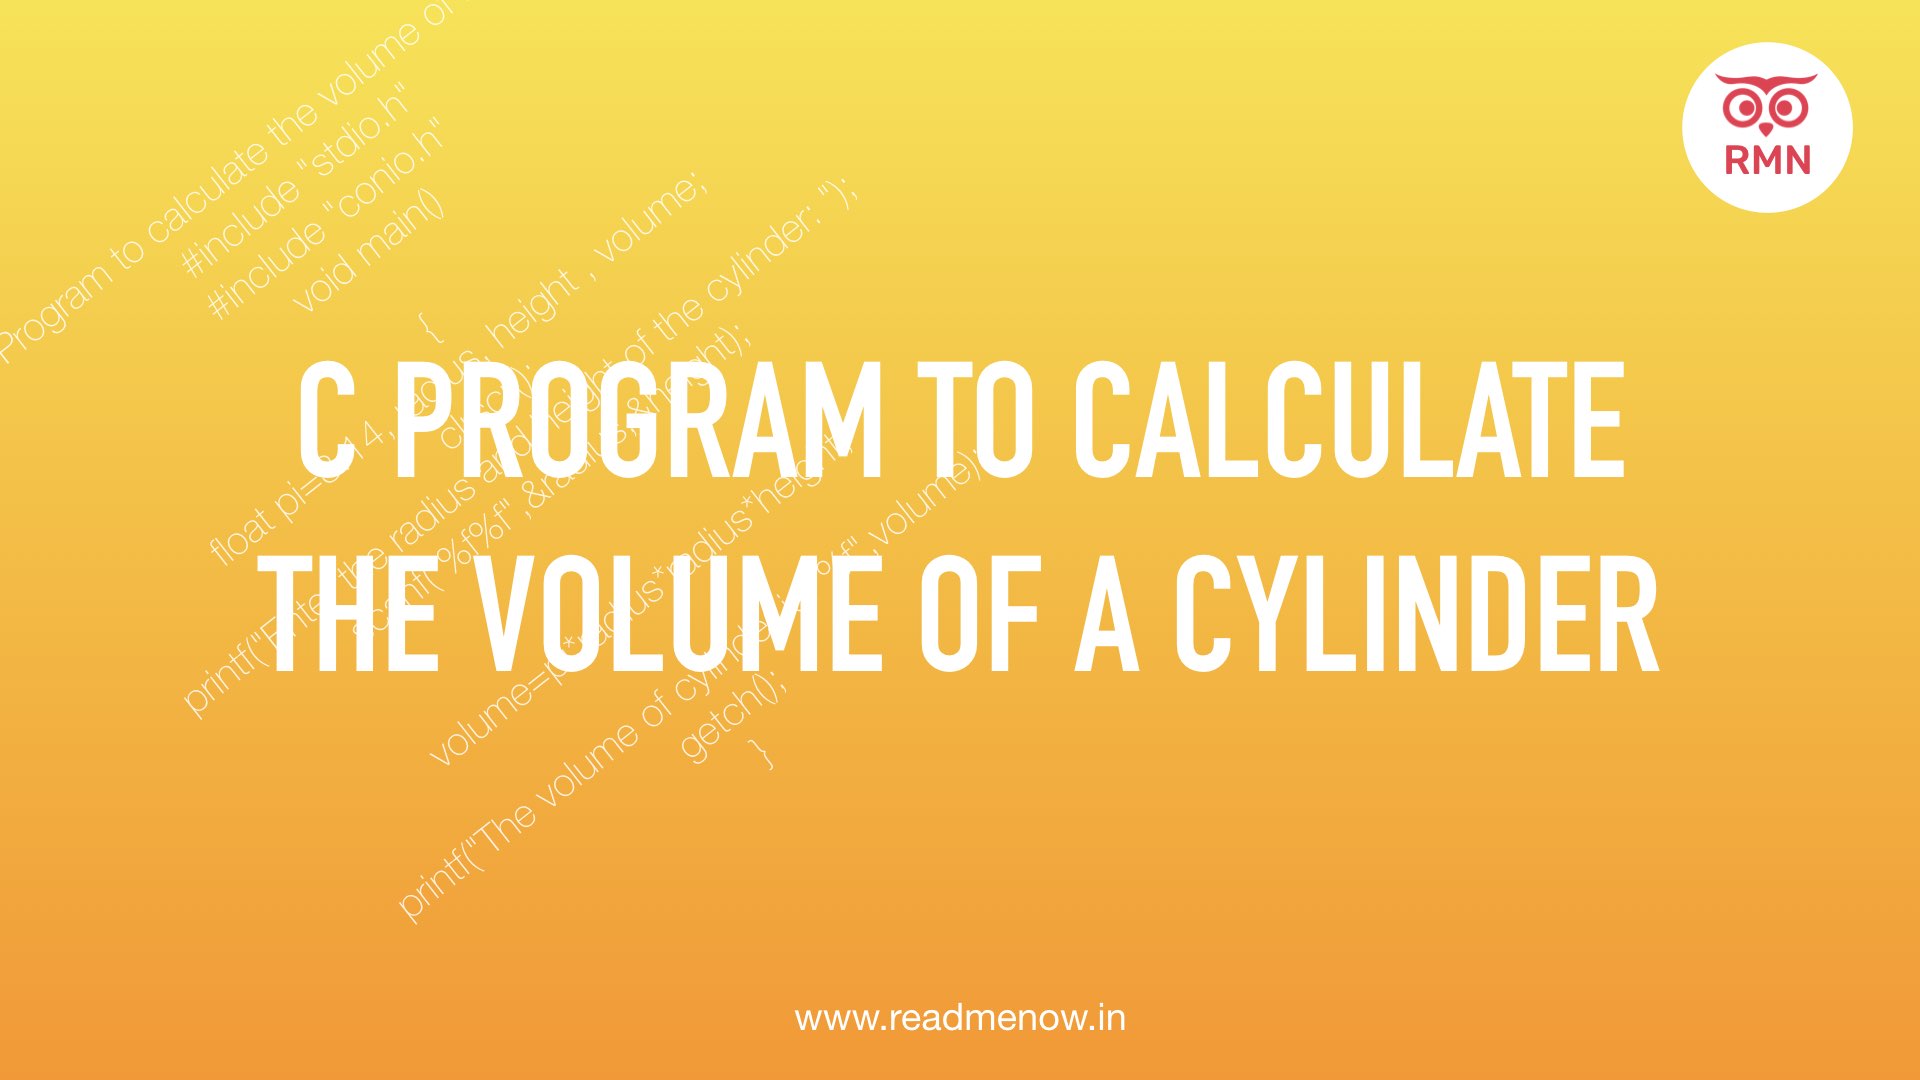 C Program to Calculate the Volume of Cylinder